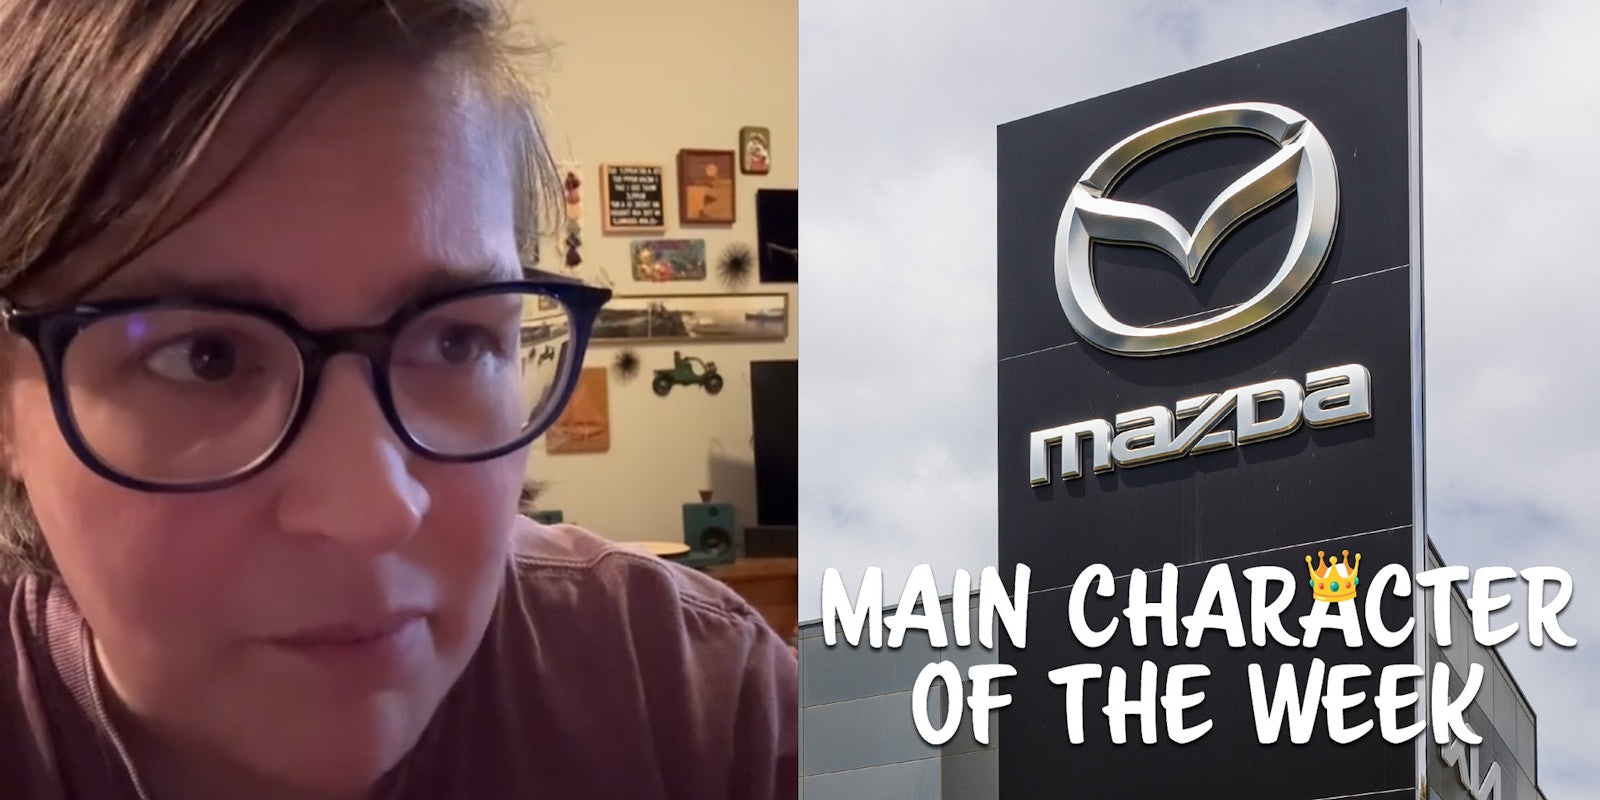 A person looking at the camera next to a sign that says Mazda. There is text in a Daily Dot newsletter web_crawlr front that says Main Character of the Week in the lower right corner.